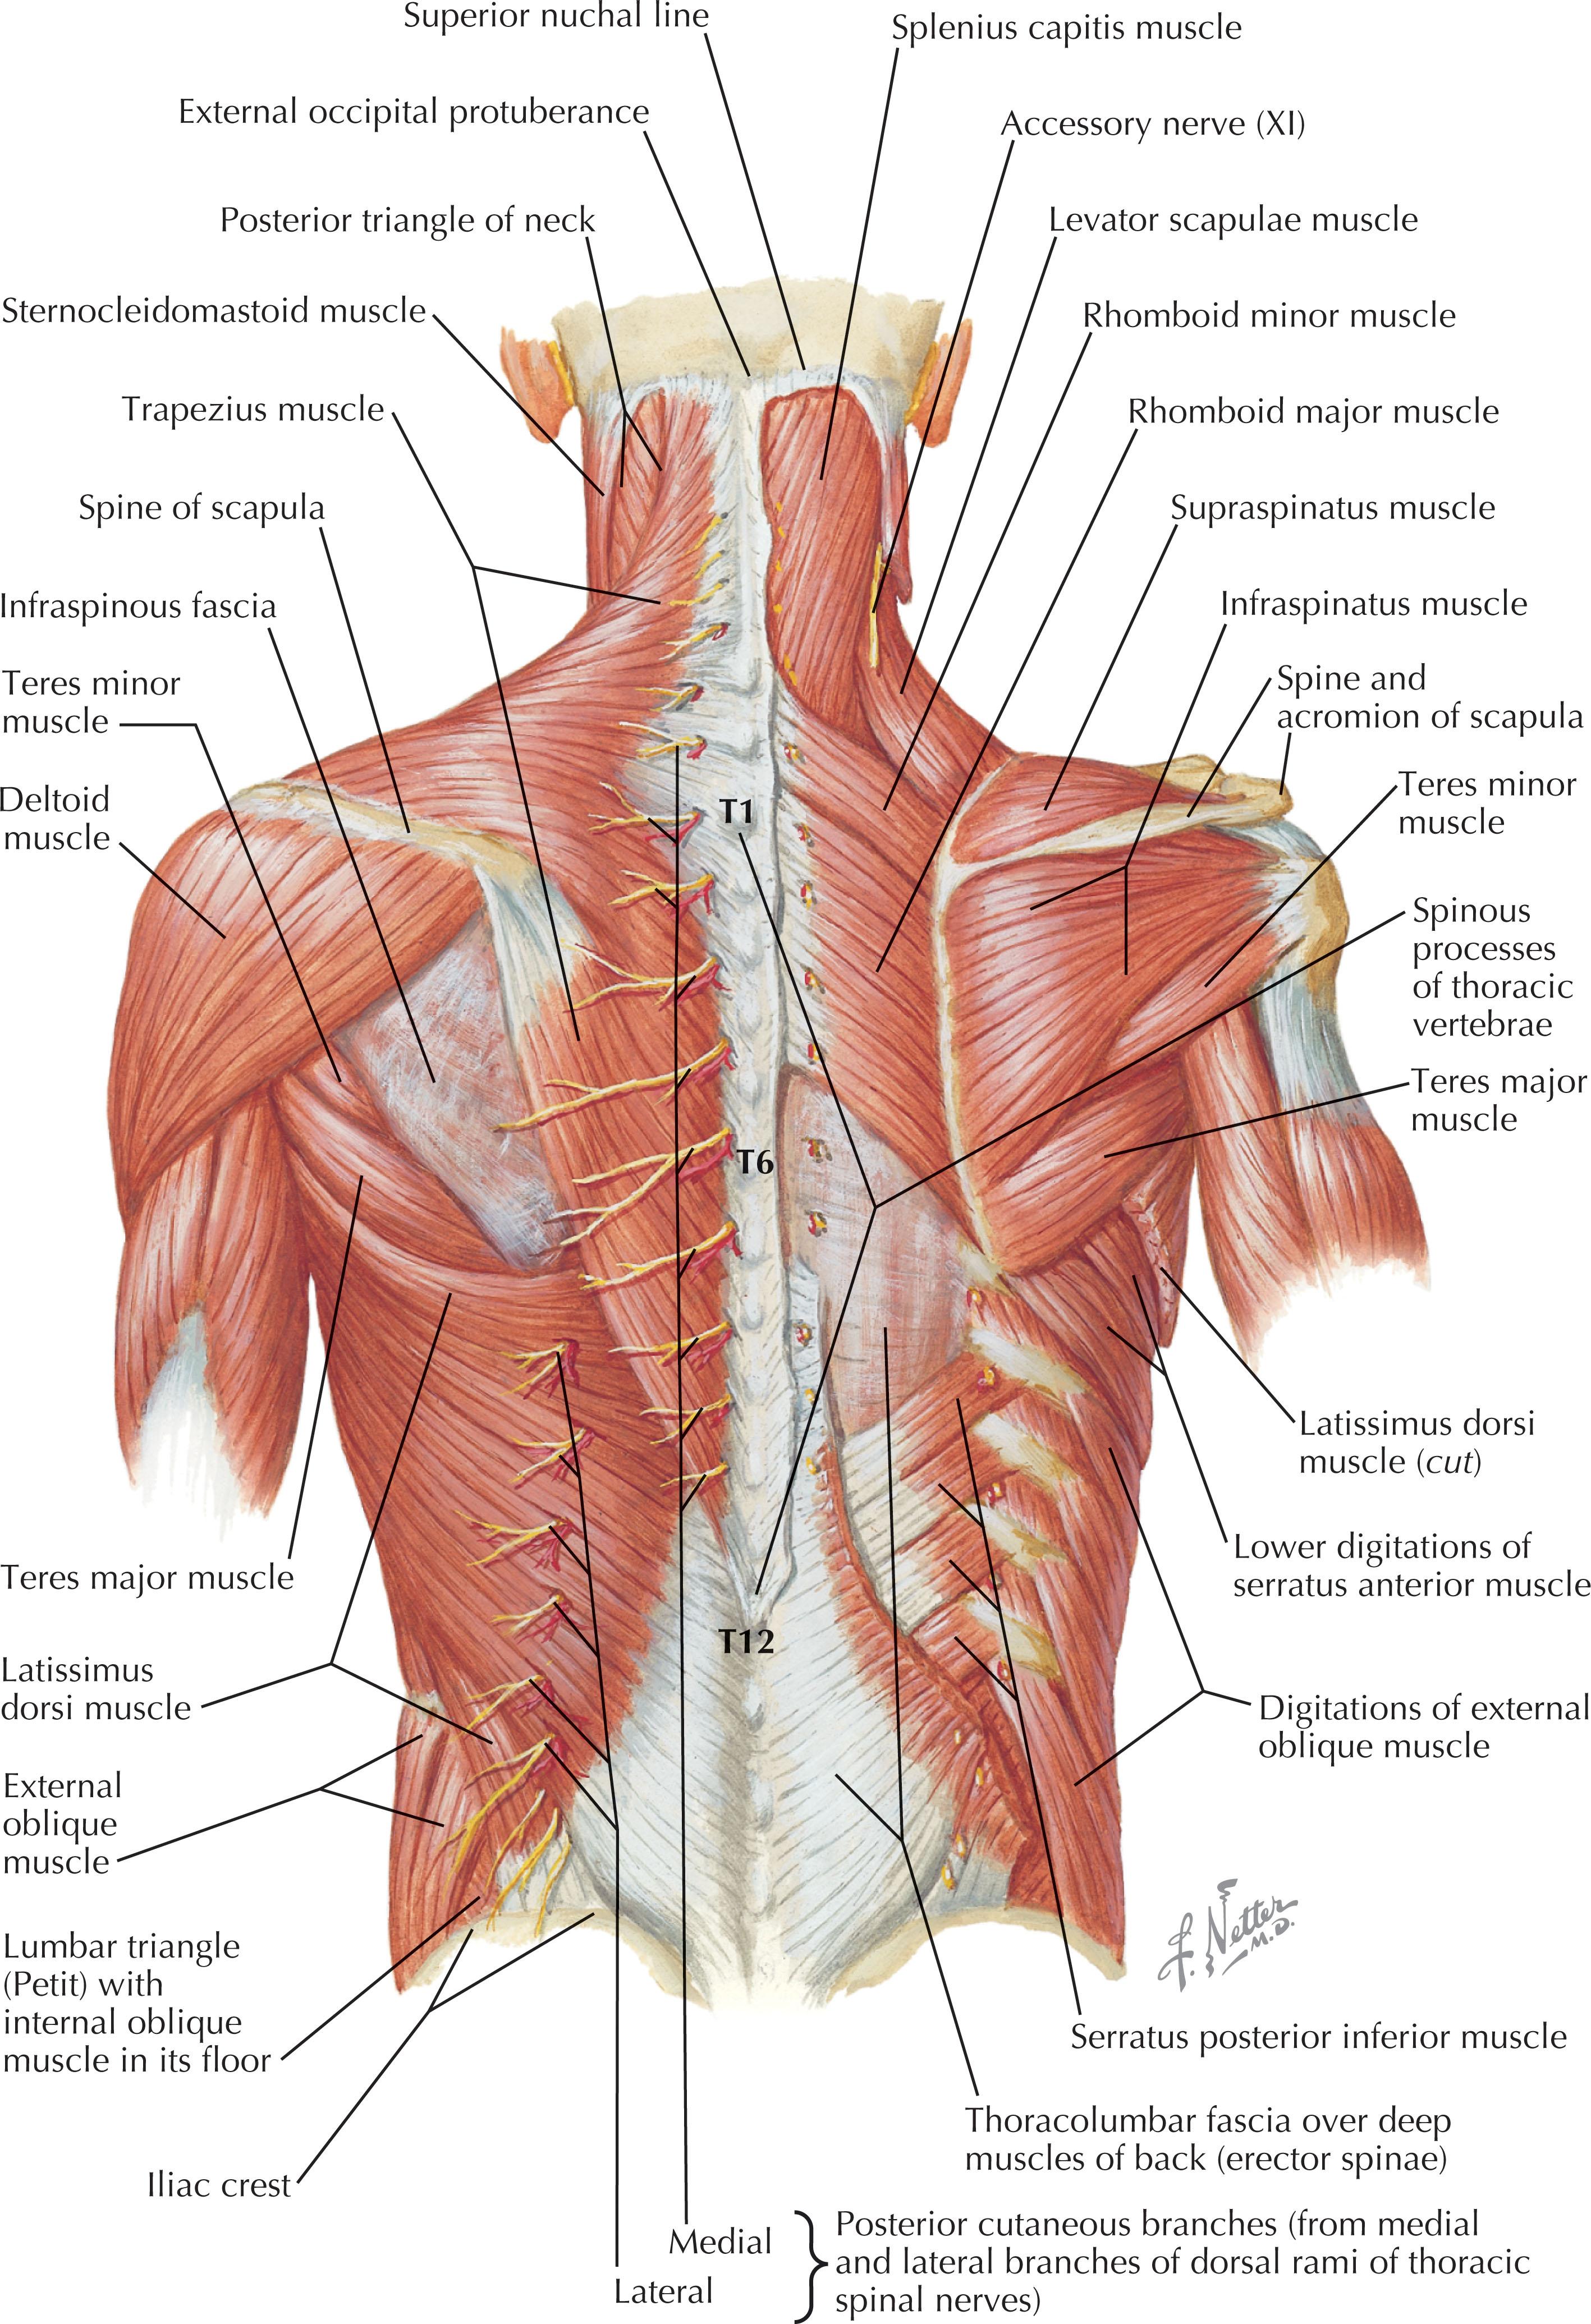 Figure 12.1, Extrinsic muscles of the back. The extrinsic muscles of the back include the two workhorse flaps in the region: the latissimus dorsi and trapezius muscle flaps. Variations of these flaps allow for a variety of closure options in the posterior trunk region.